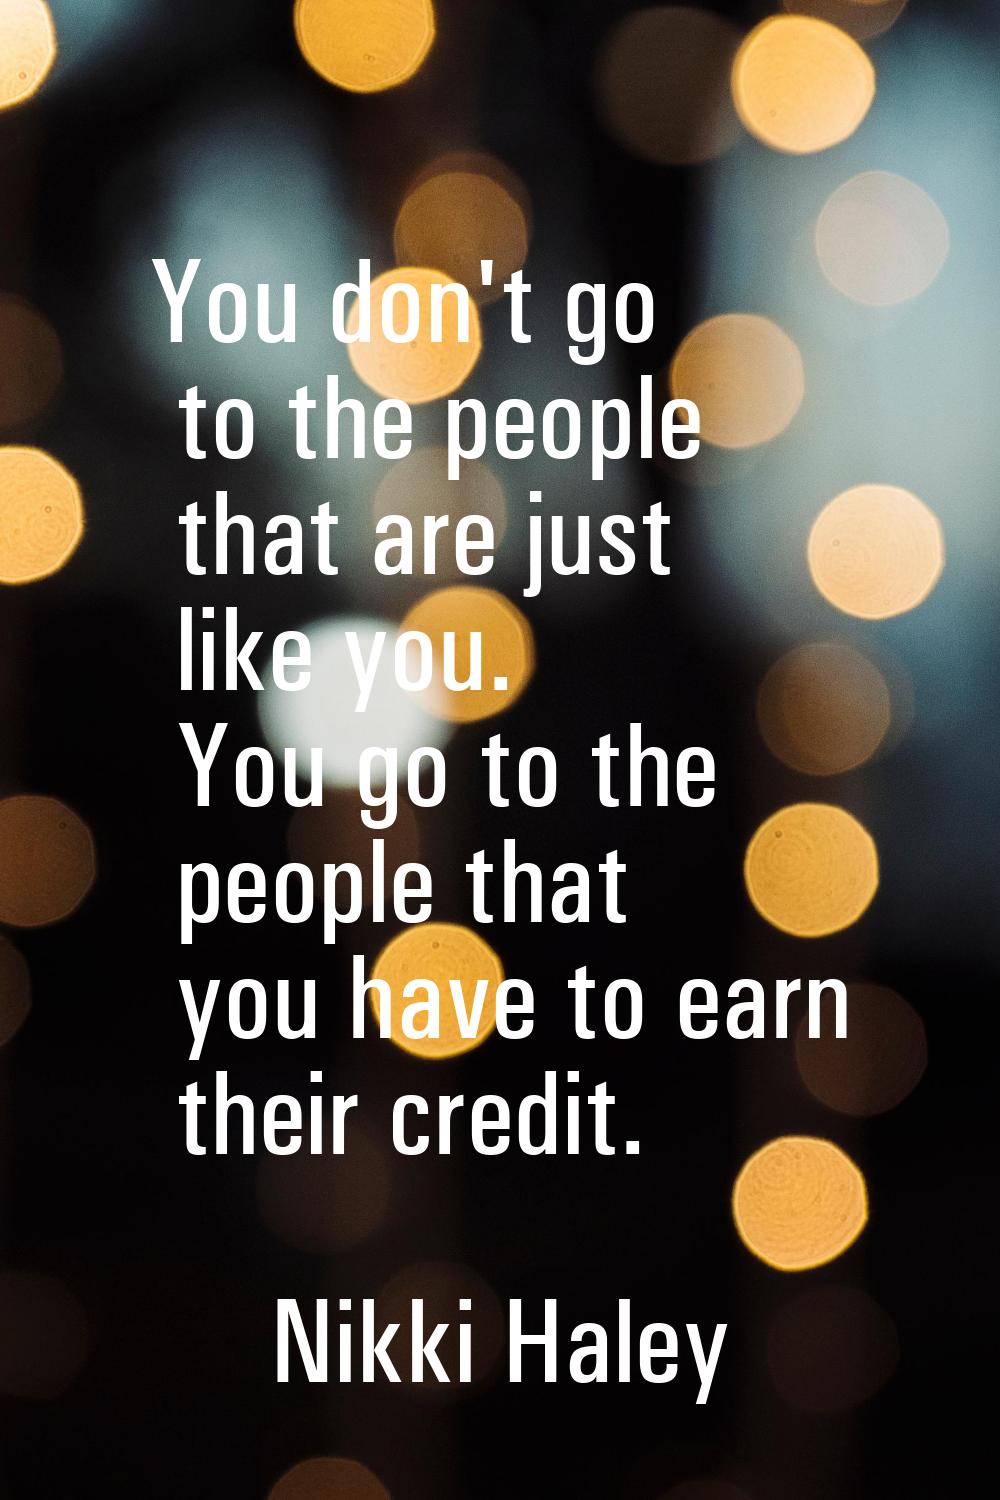 You don't go to the people that are just like you. You go to the people that you have to earn their